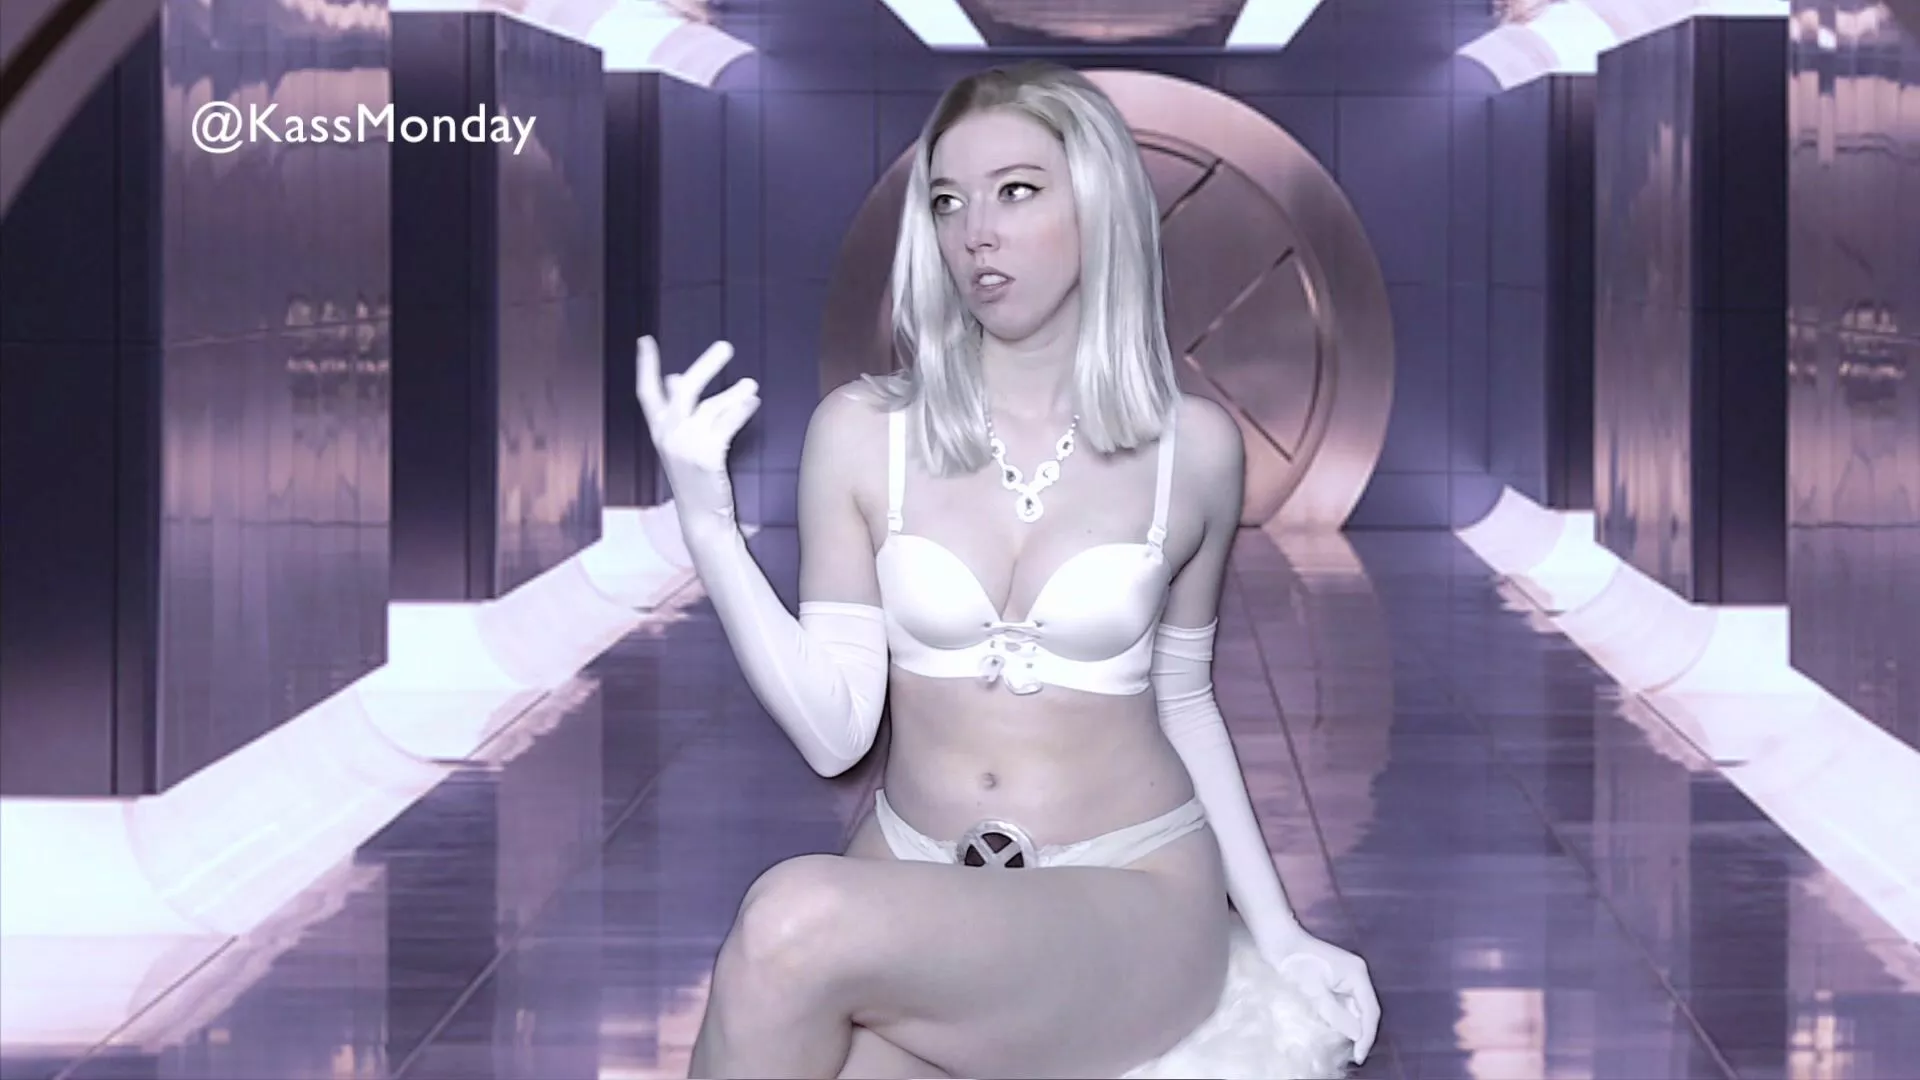 Emma frost camgirl